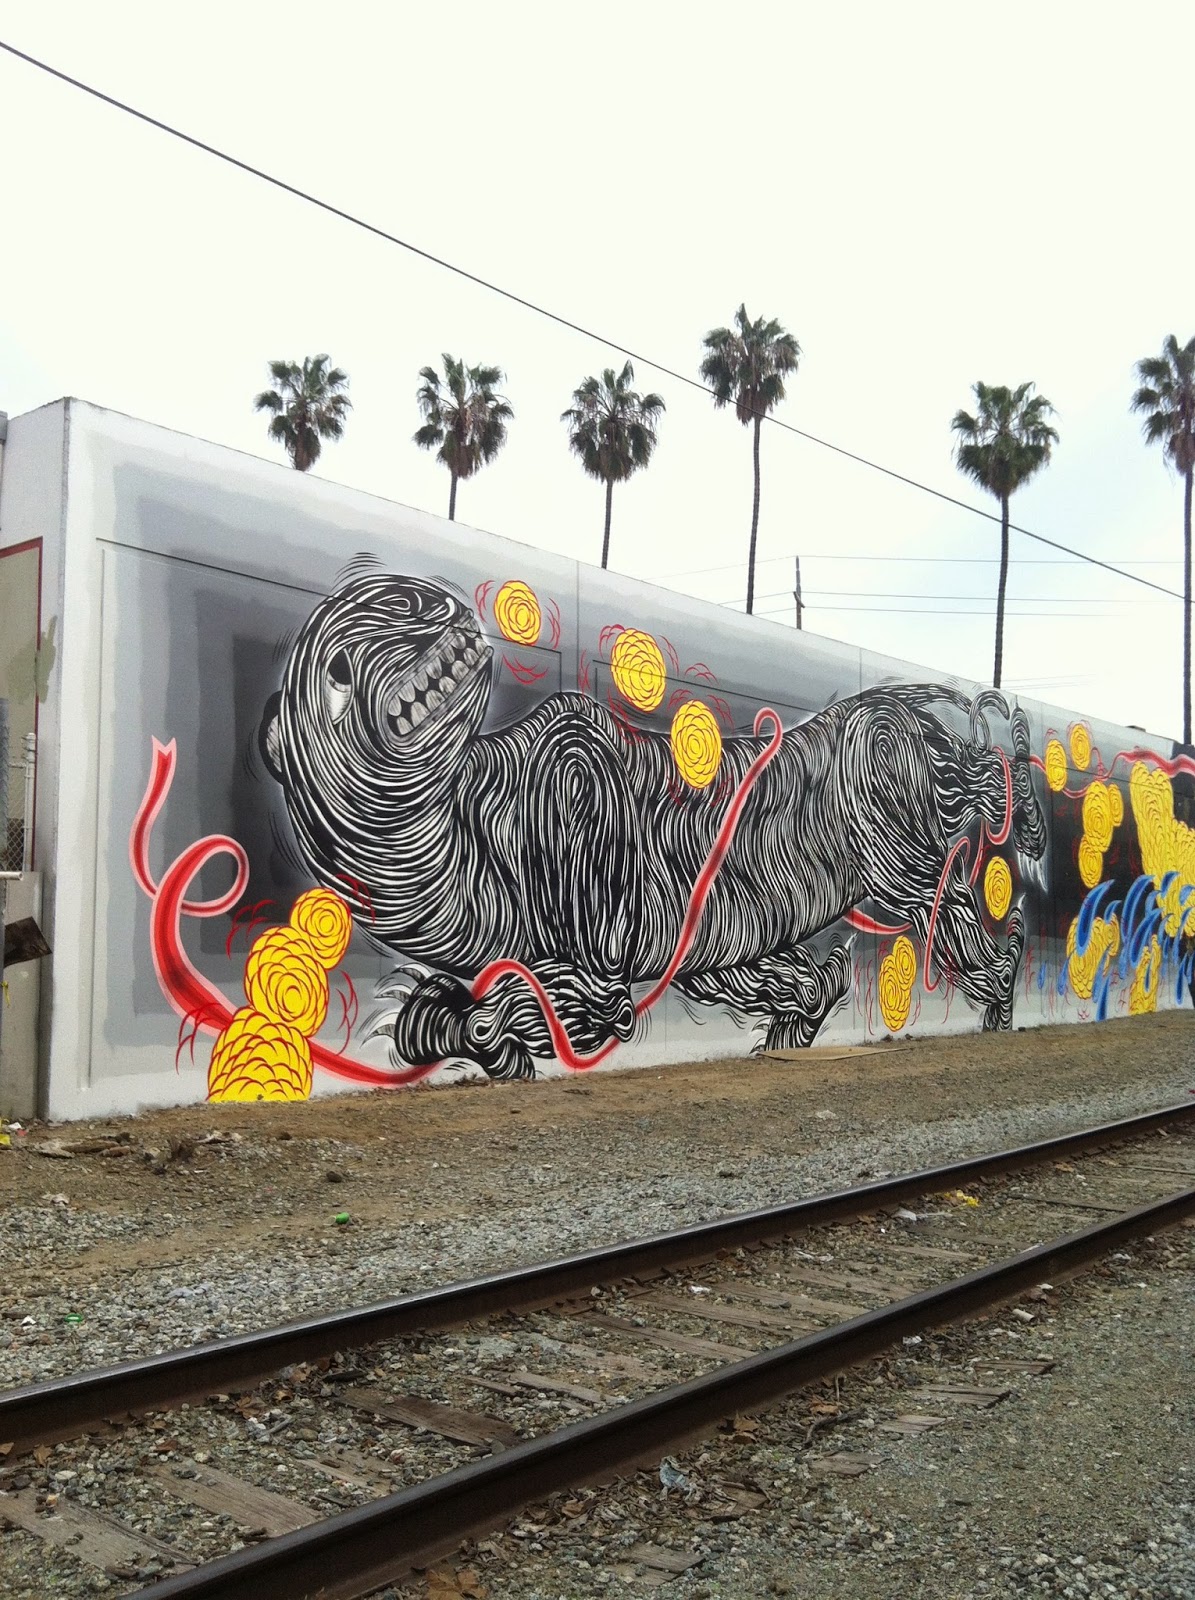 Andrew Schoultz is currently in Santa Fe, California where he just finished working on this beasty mural.